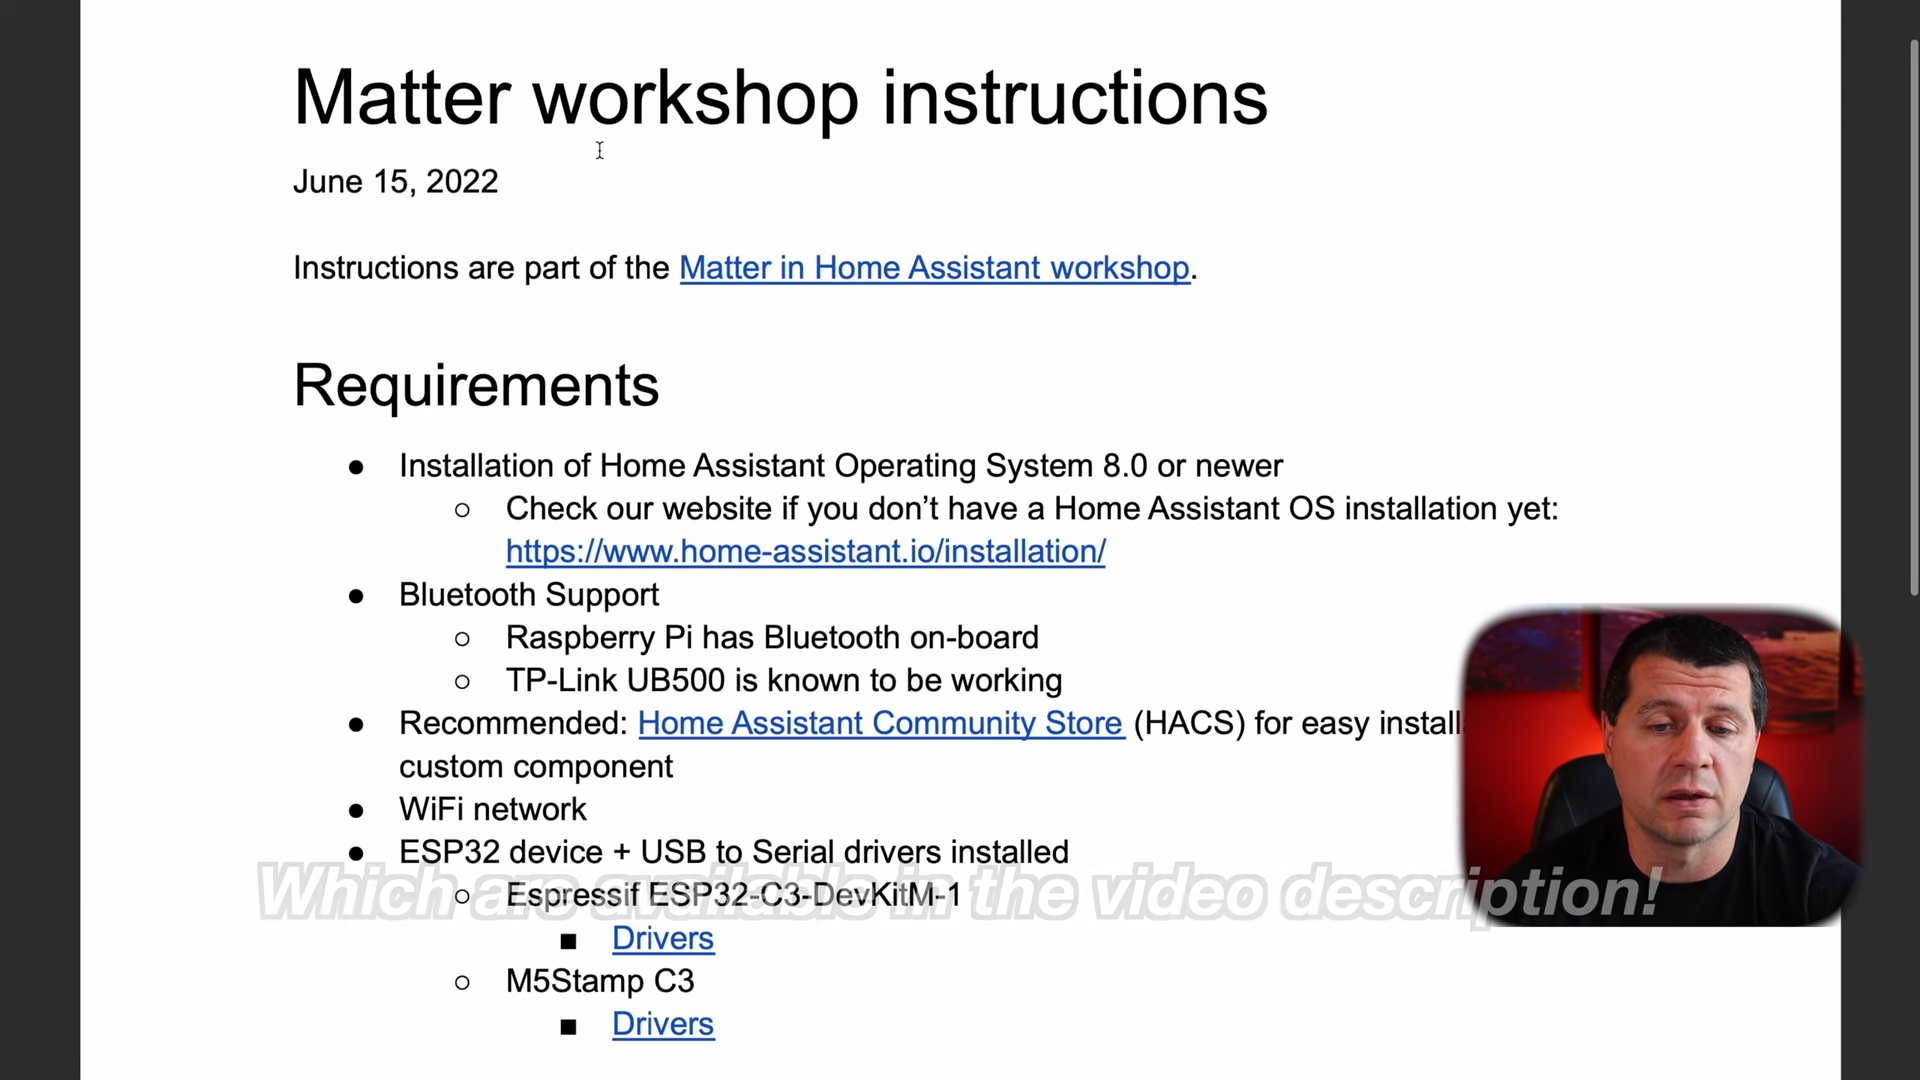 A picture of Matter WorkShop Instructions